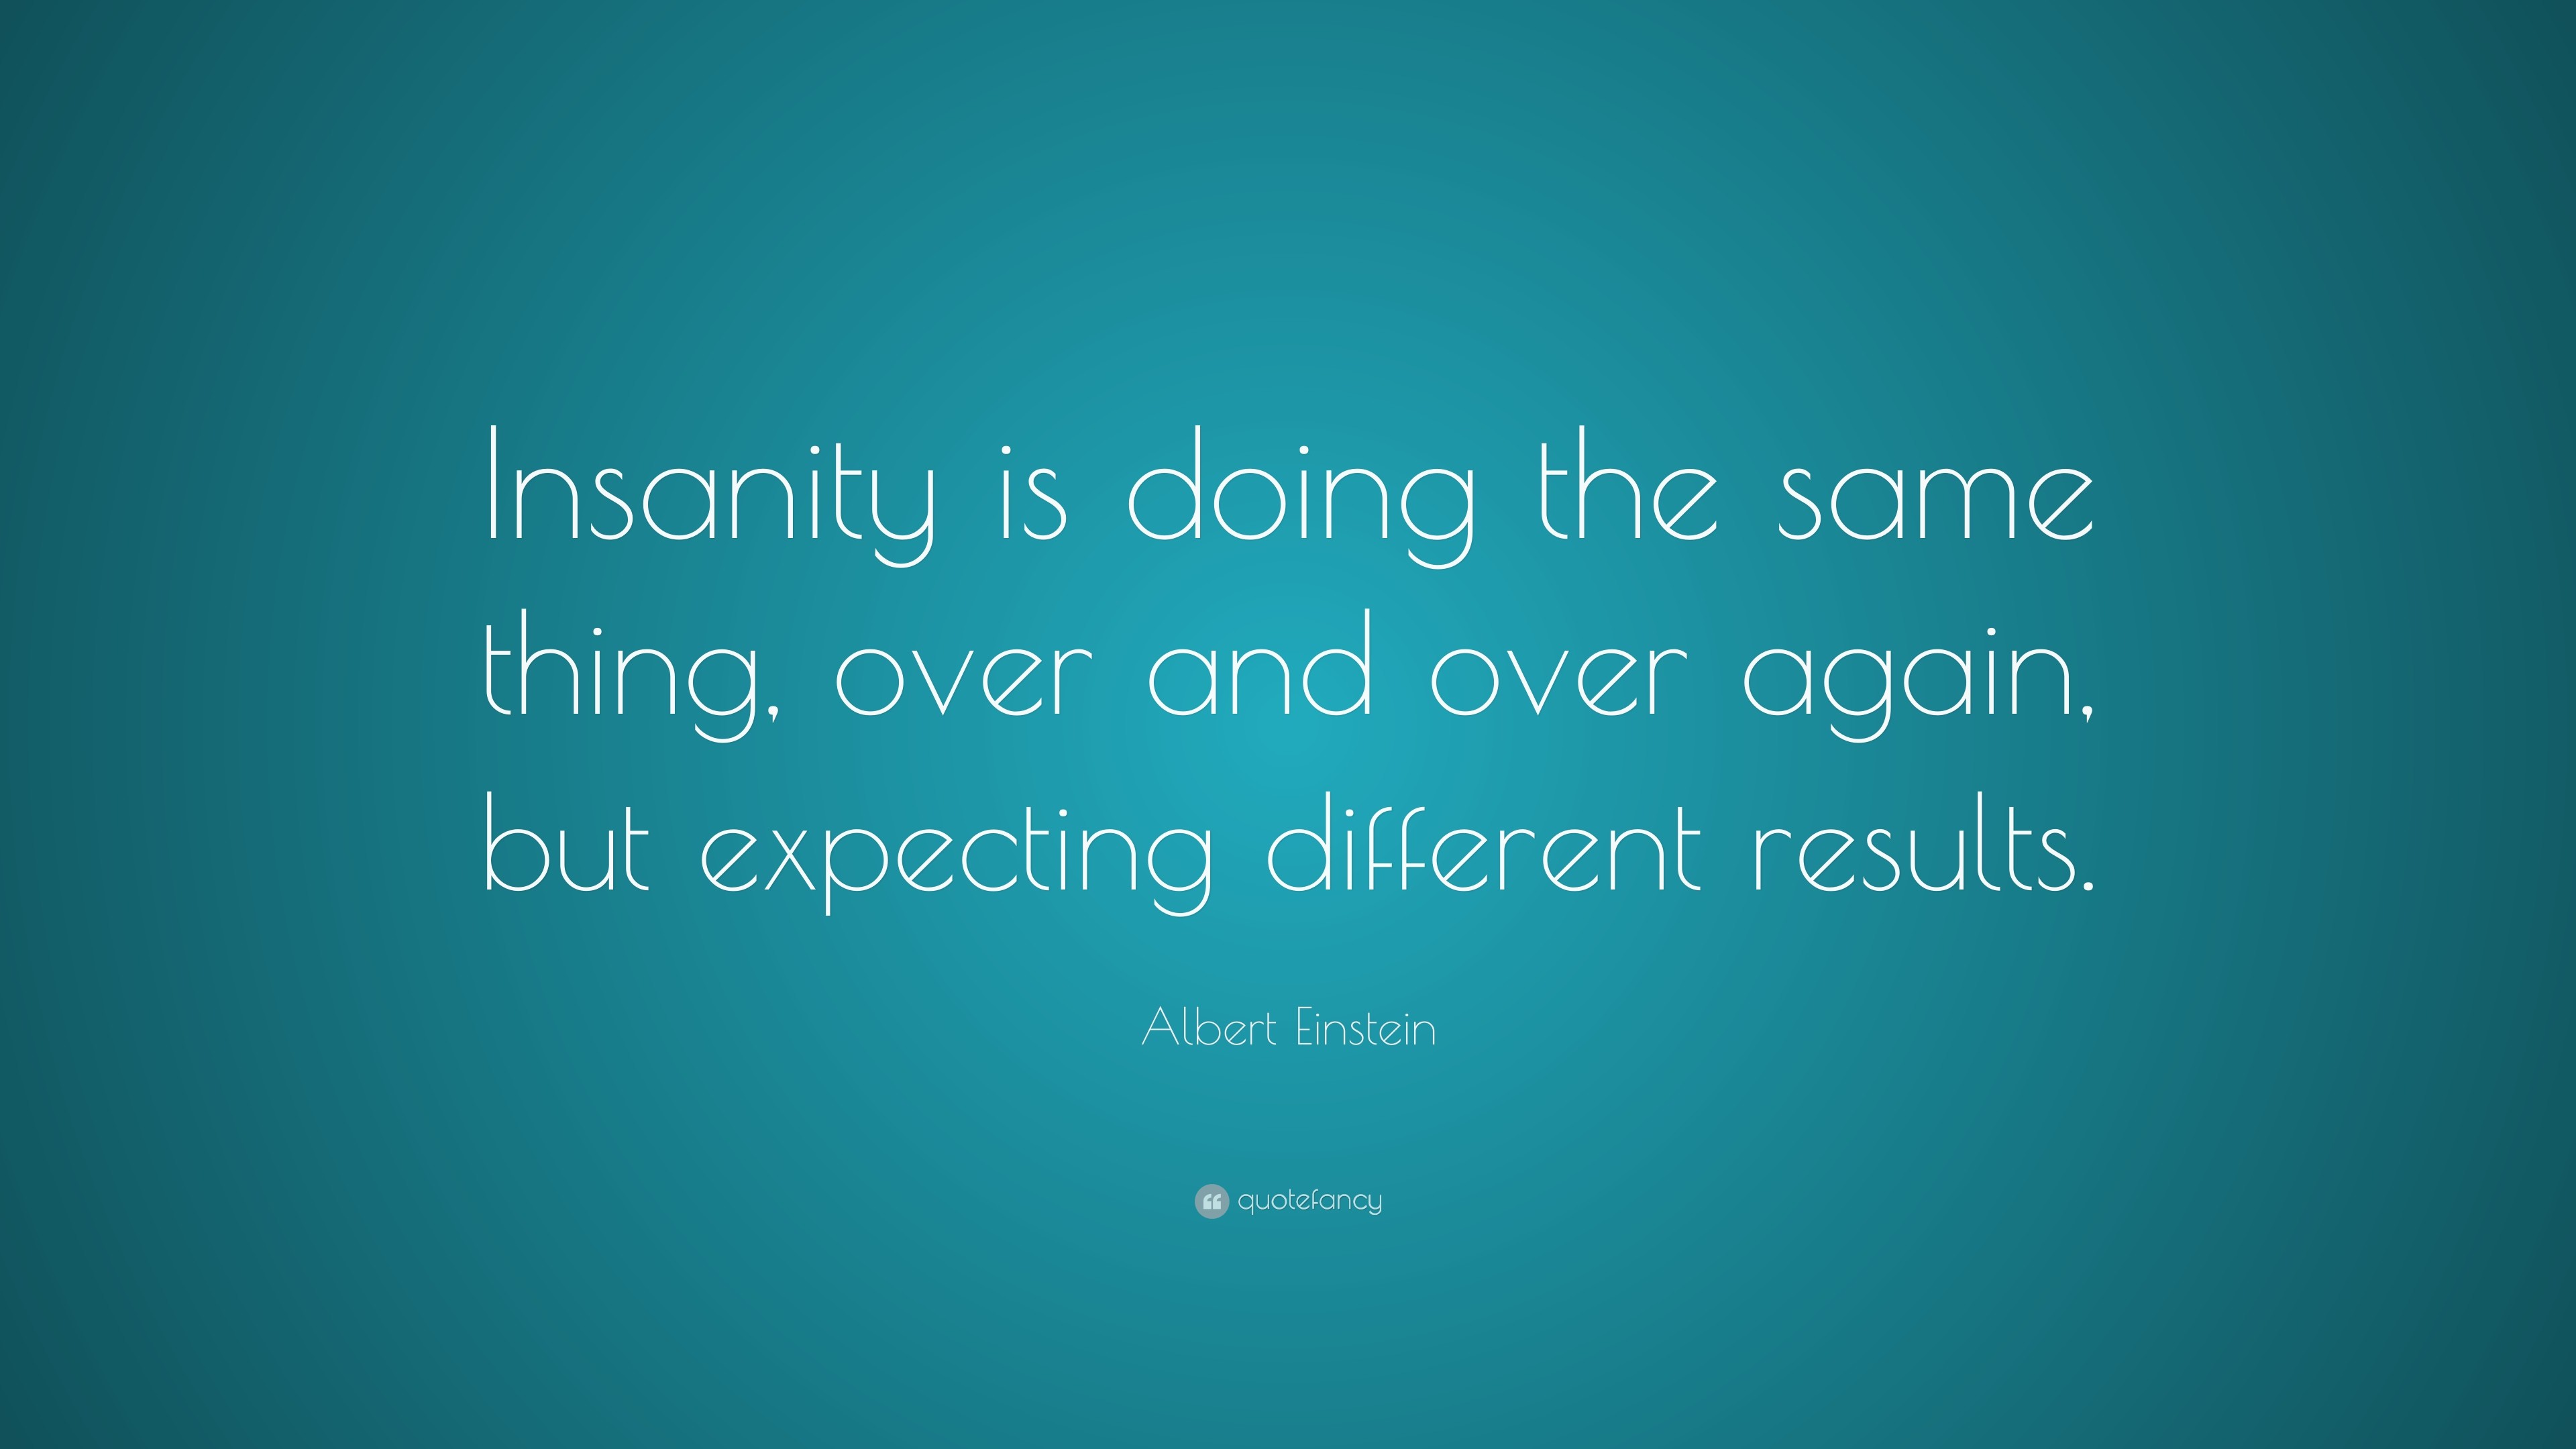 3840x2160 Albert Einstein Quote: “Insanity is doing the same thing, over and over  again